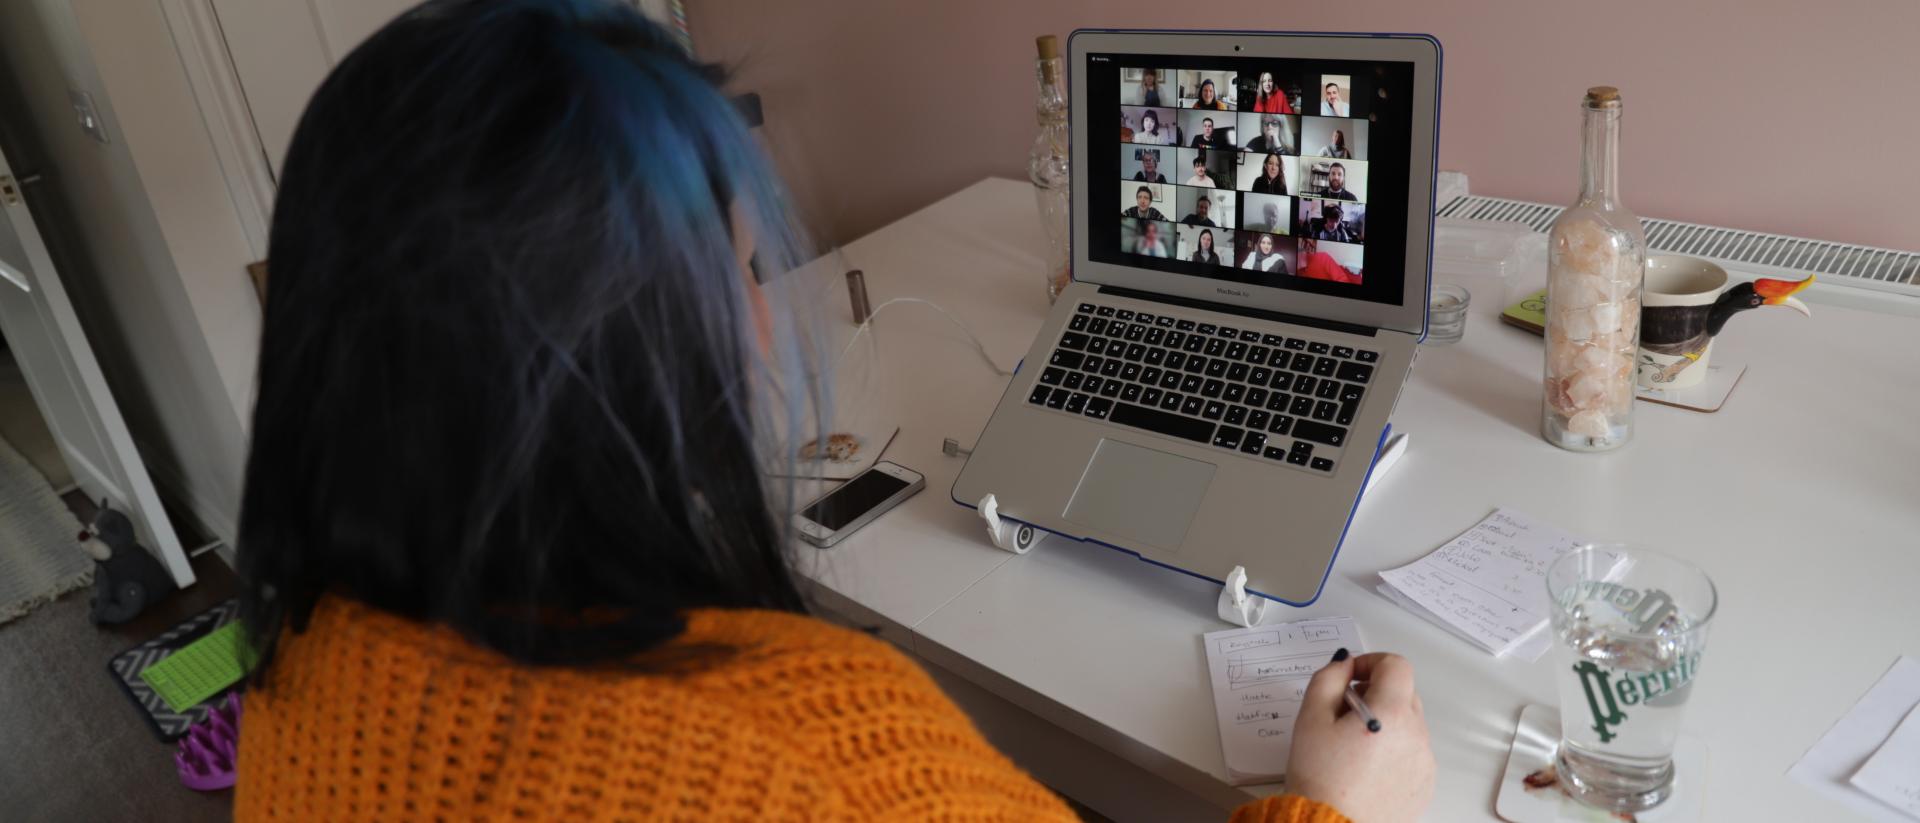 a photo of a person participating in an online meeting